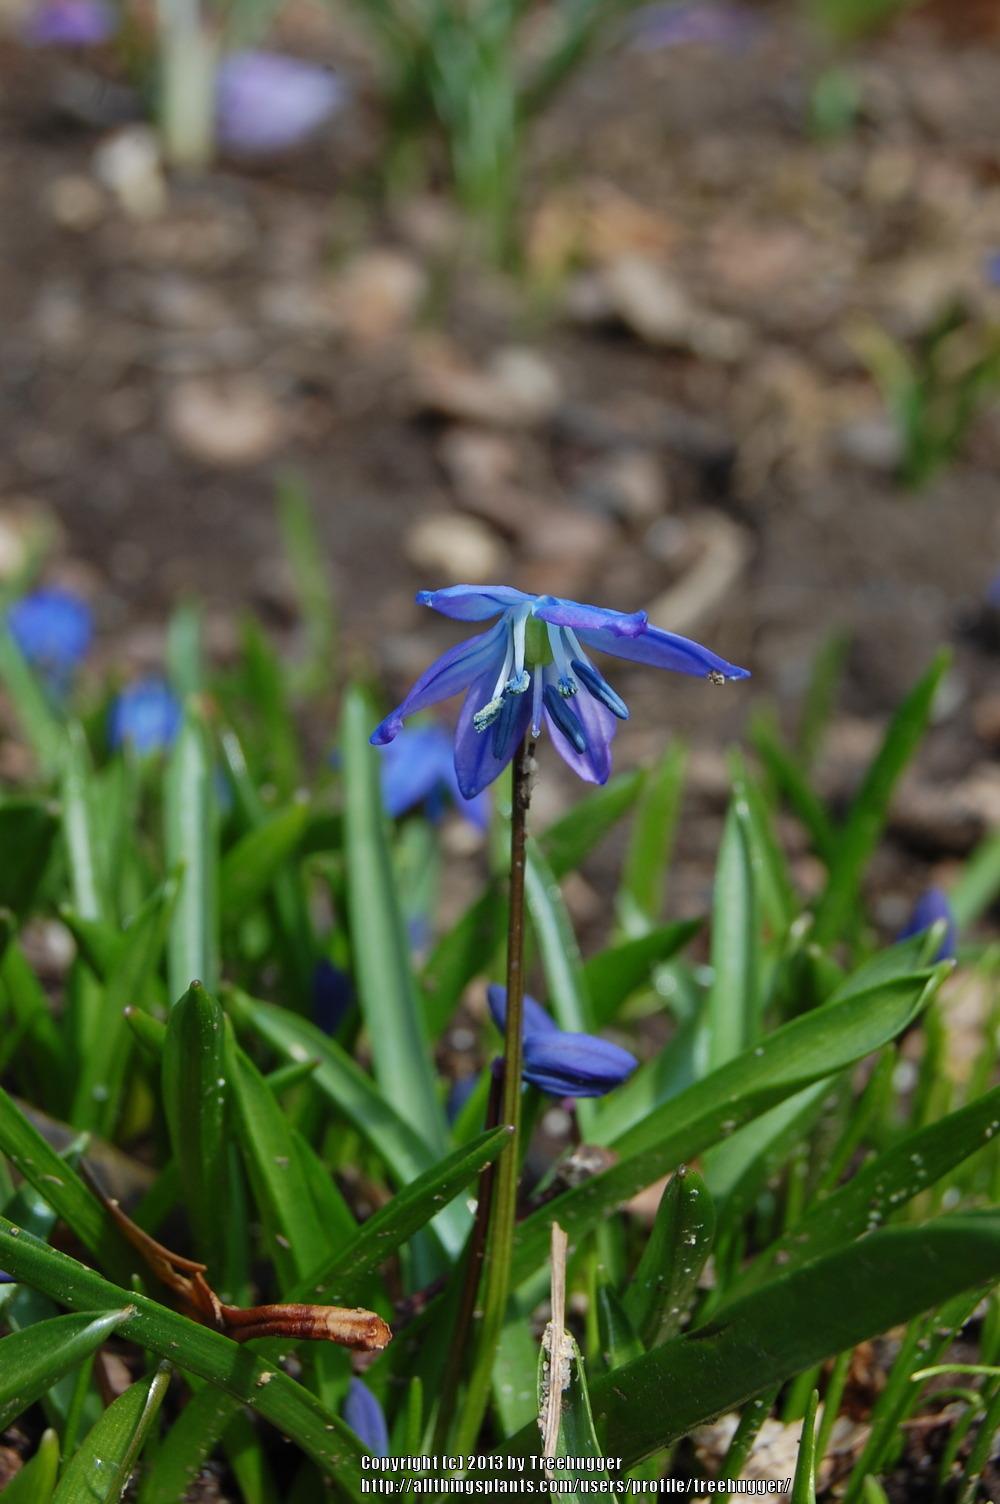 Photo of Siberian Squill (Scilla siberica) uploaded by treehugger